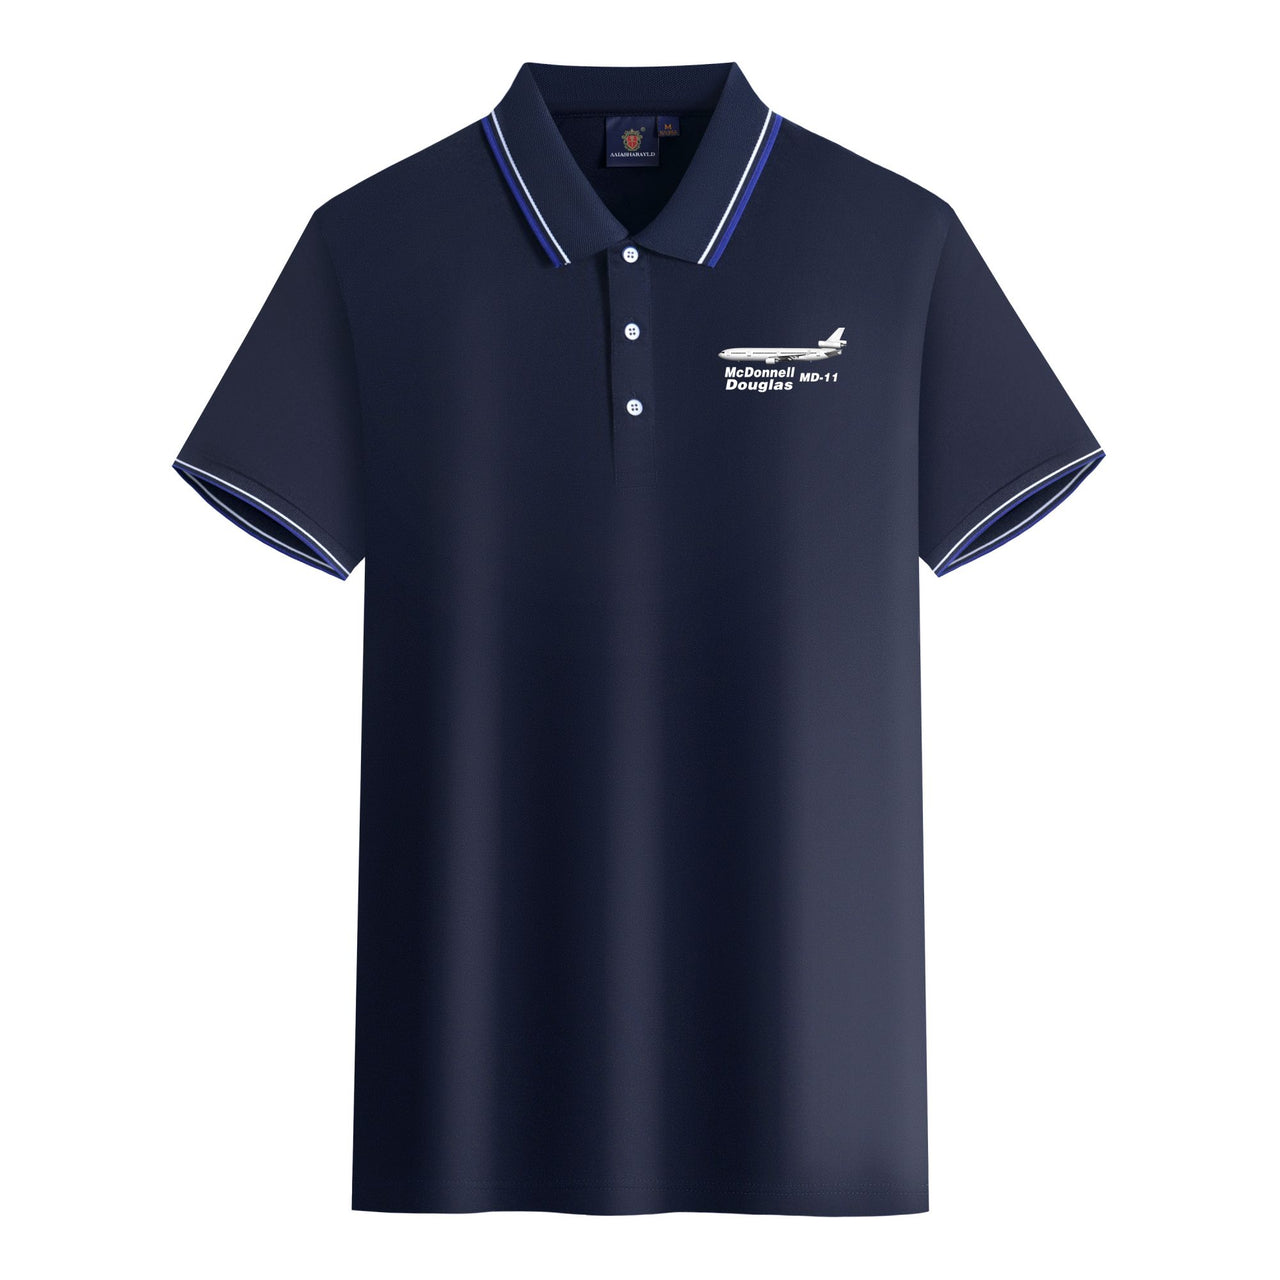 The McDonnell Douglas MD-11 Designed Stylish Polo T-Shirts